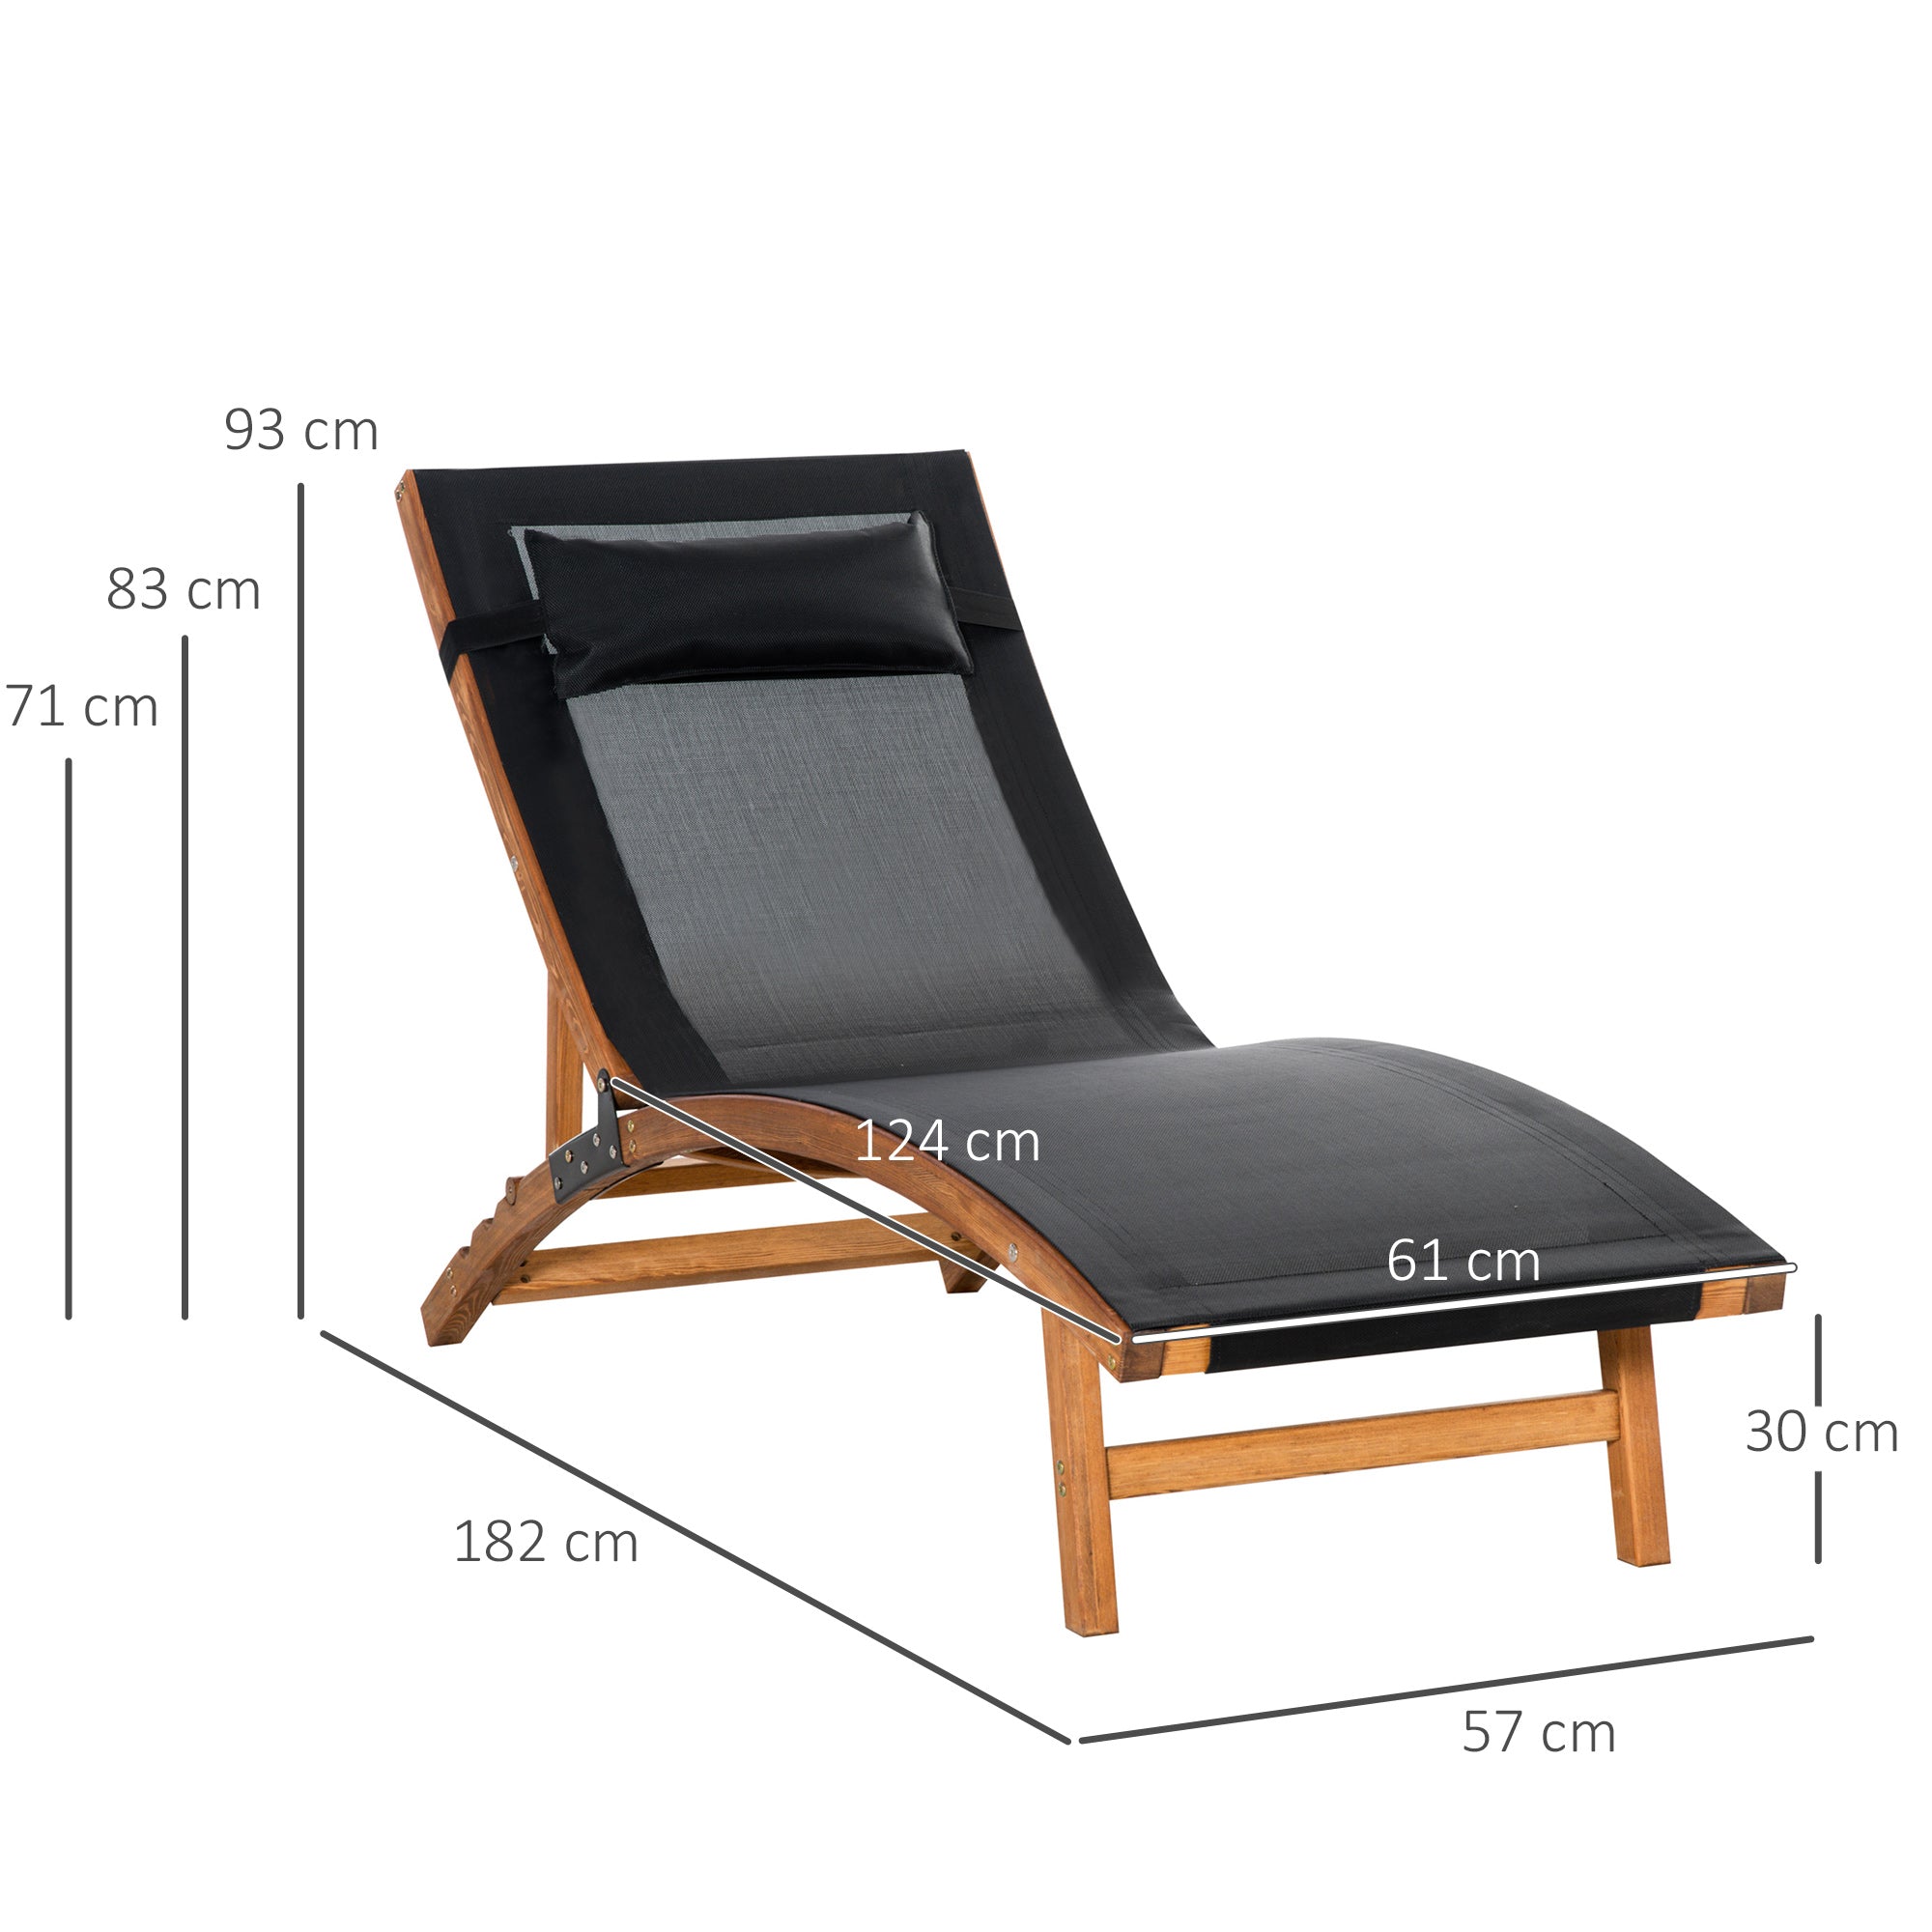 Outsunny Ergonomic Patio Lounge Chair Wooden Outdoor Chaise w/ 3 Adjustable Back and Removable Headrest Pillow for Garden Black